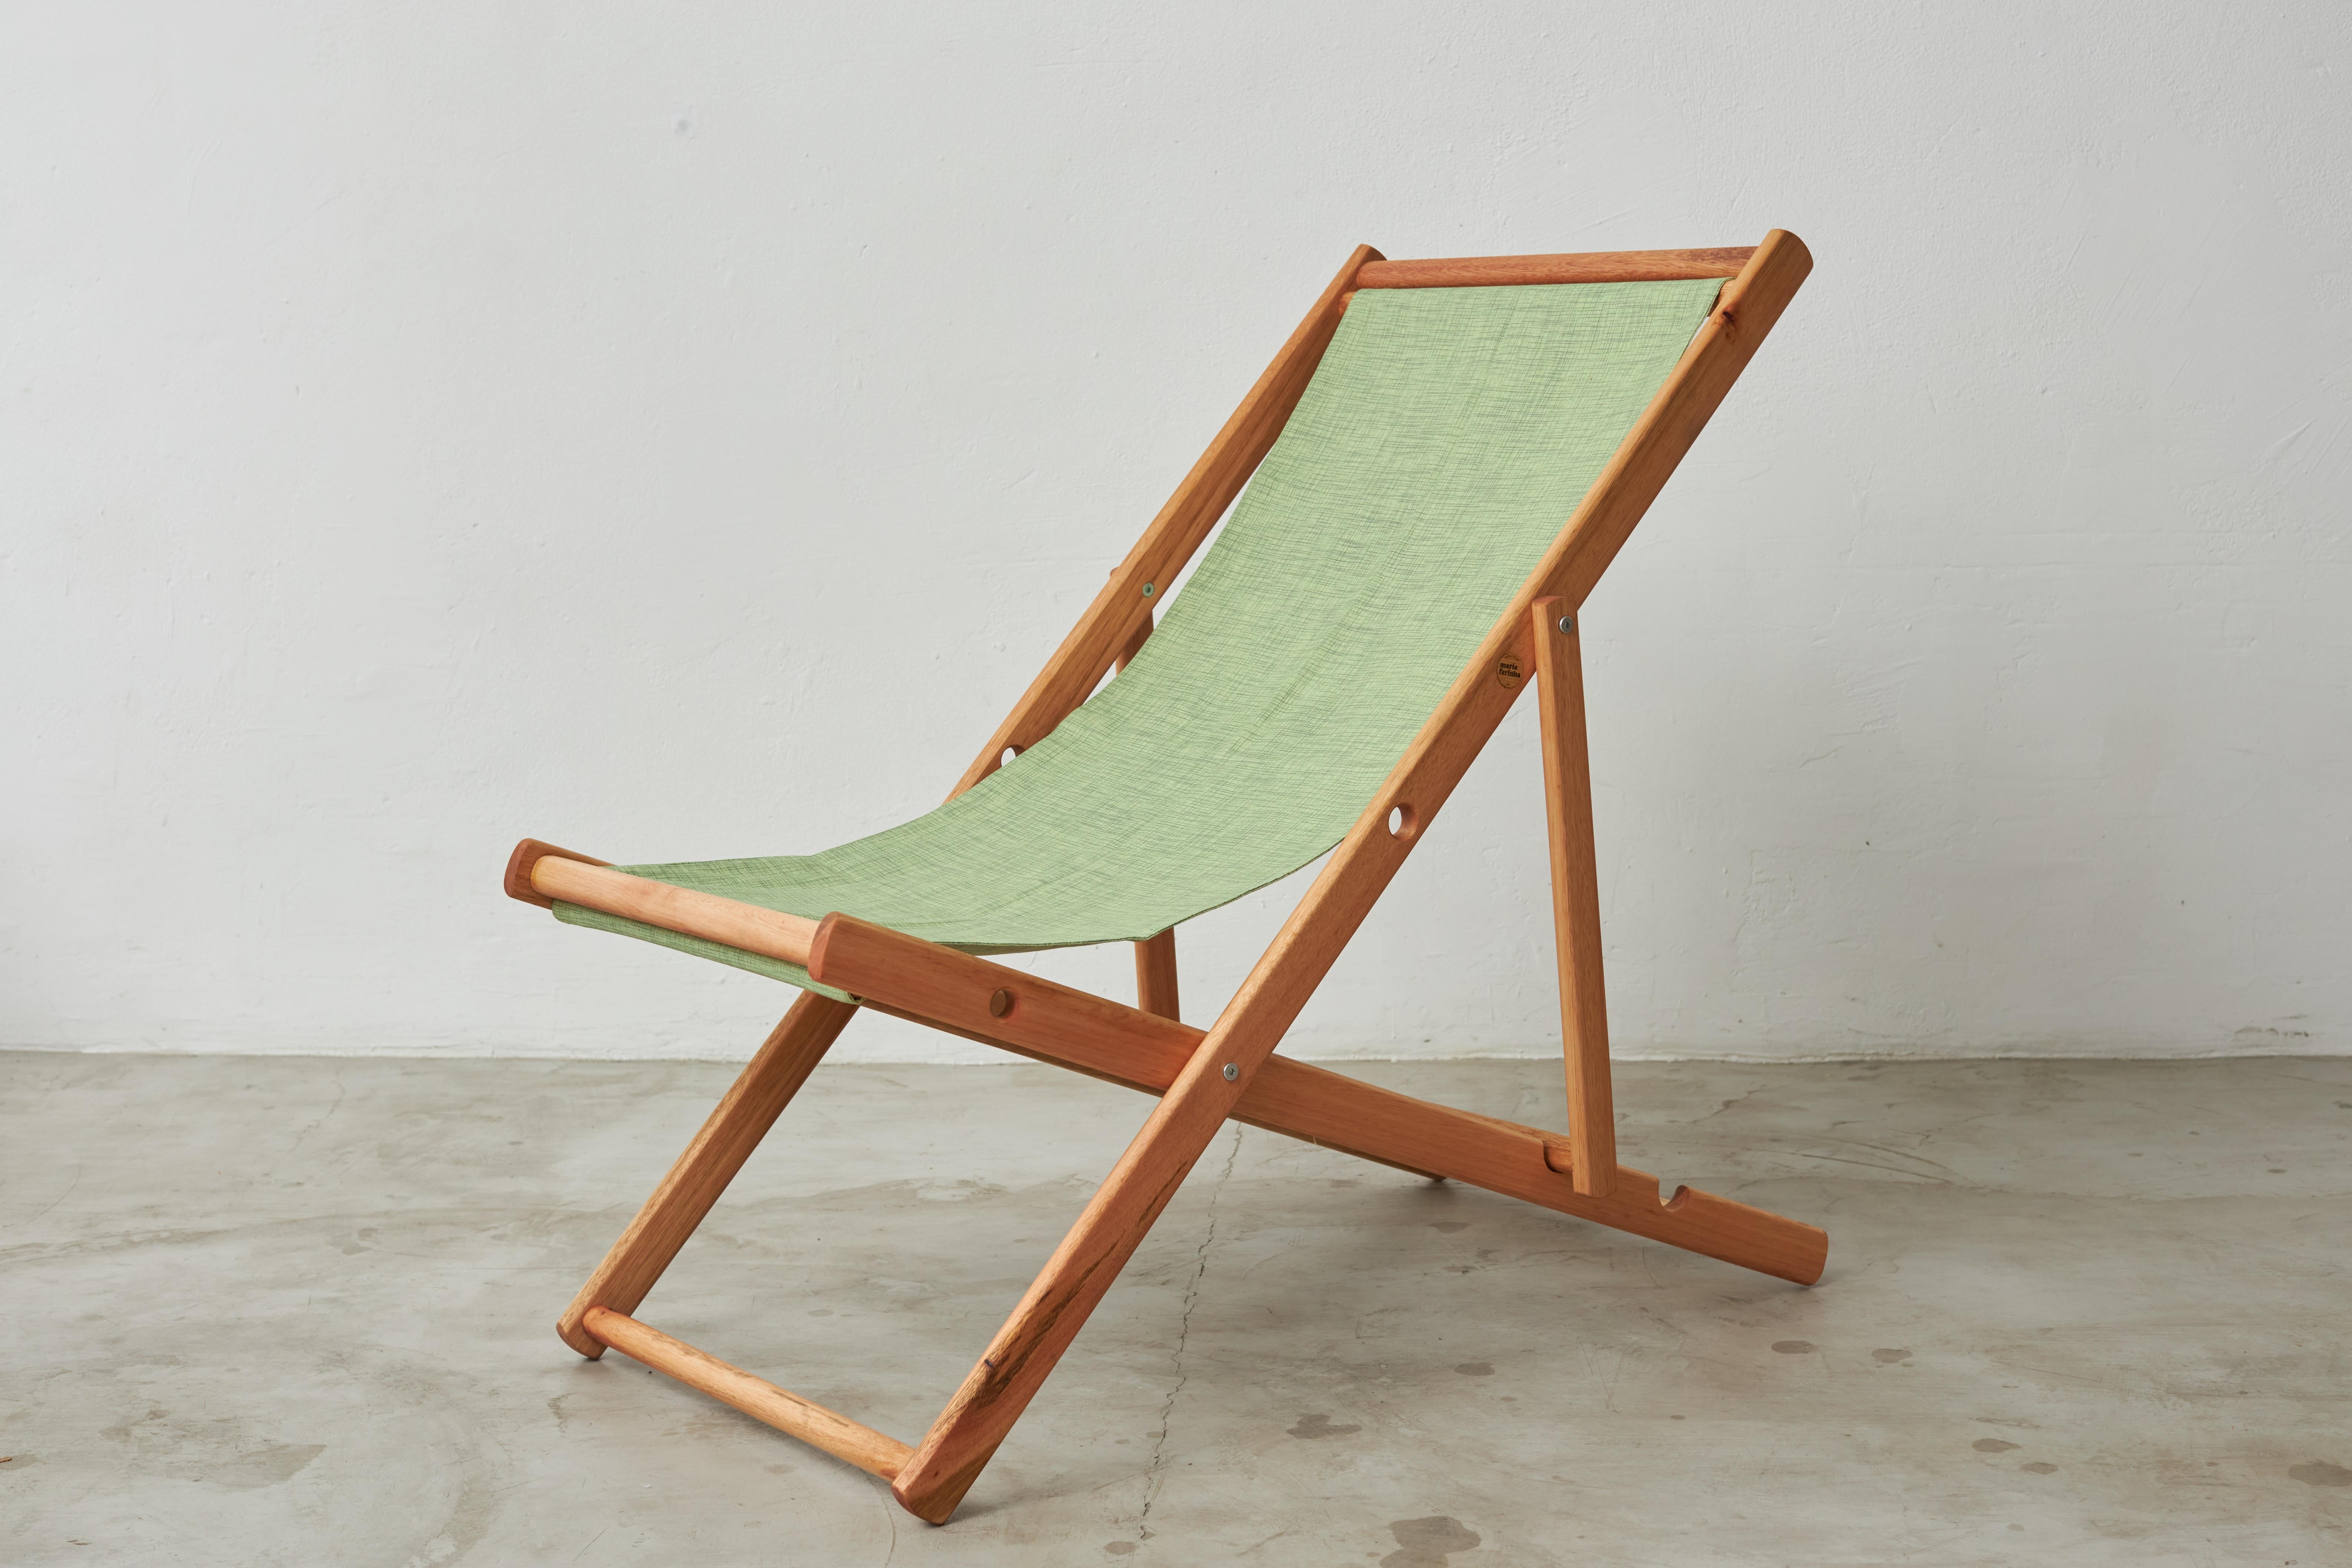 Woodwork  Green 'Maria Farinha' Armchair - Brazilian design by André Bianco For Sale